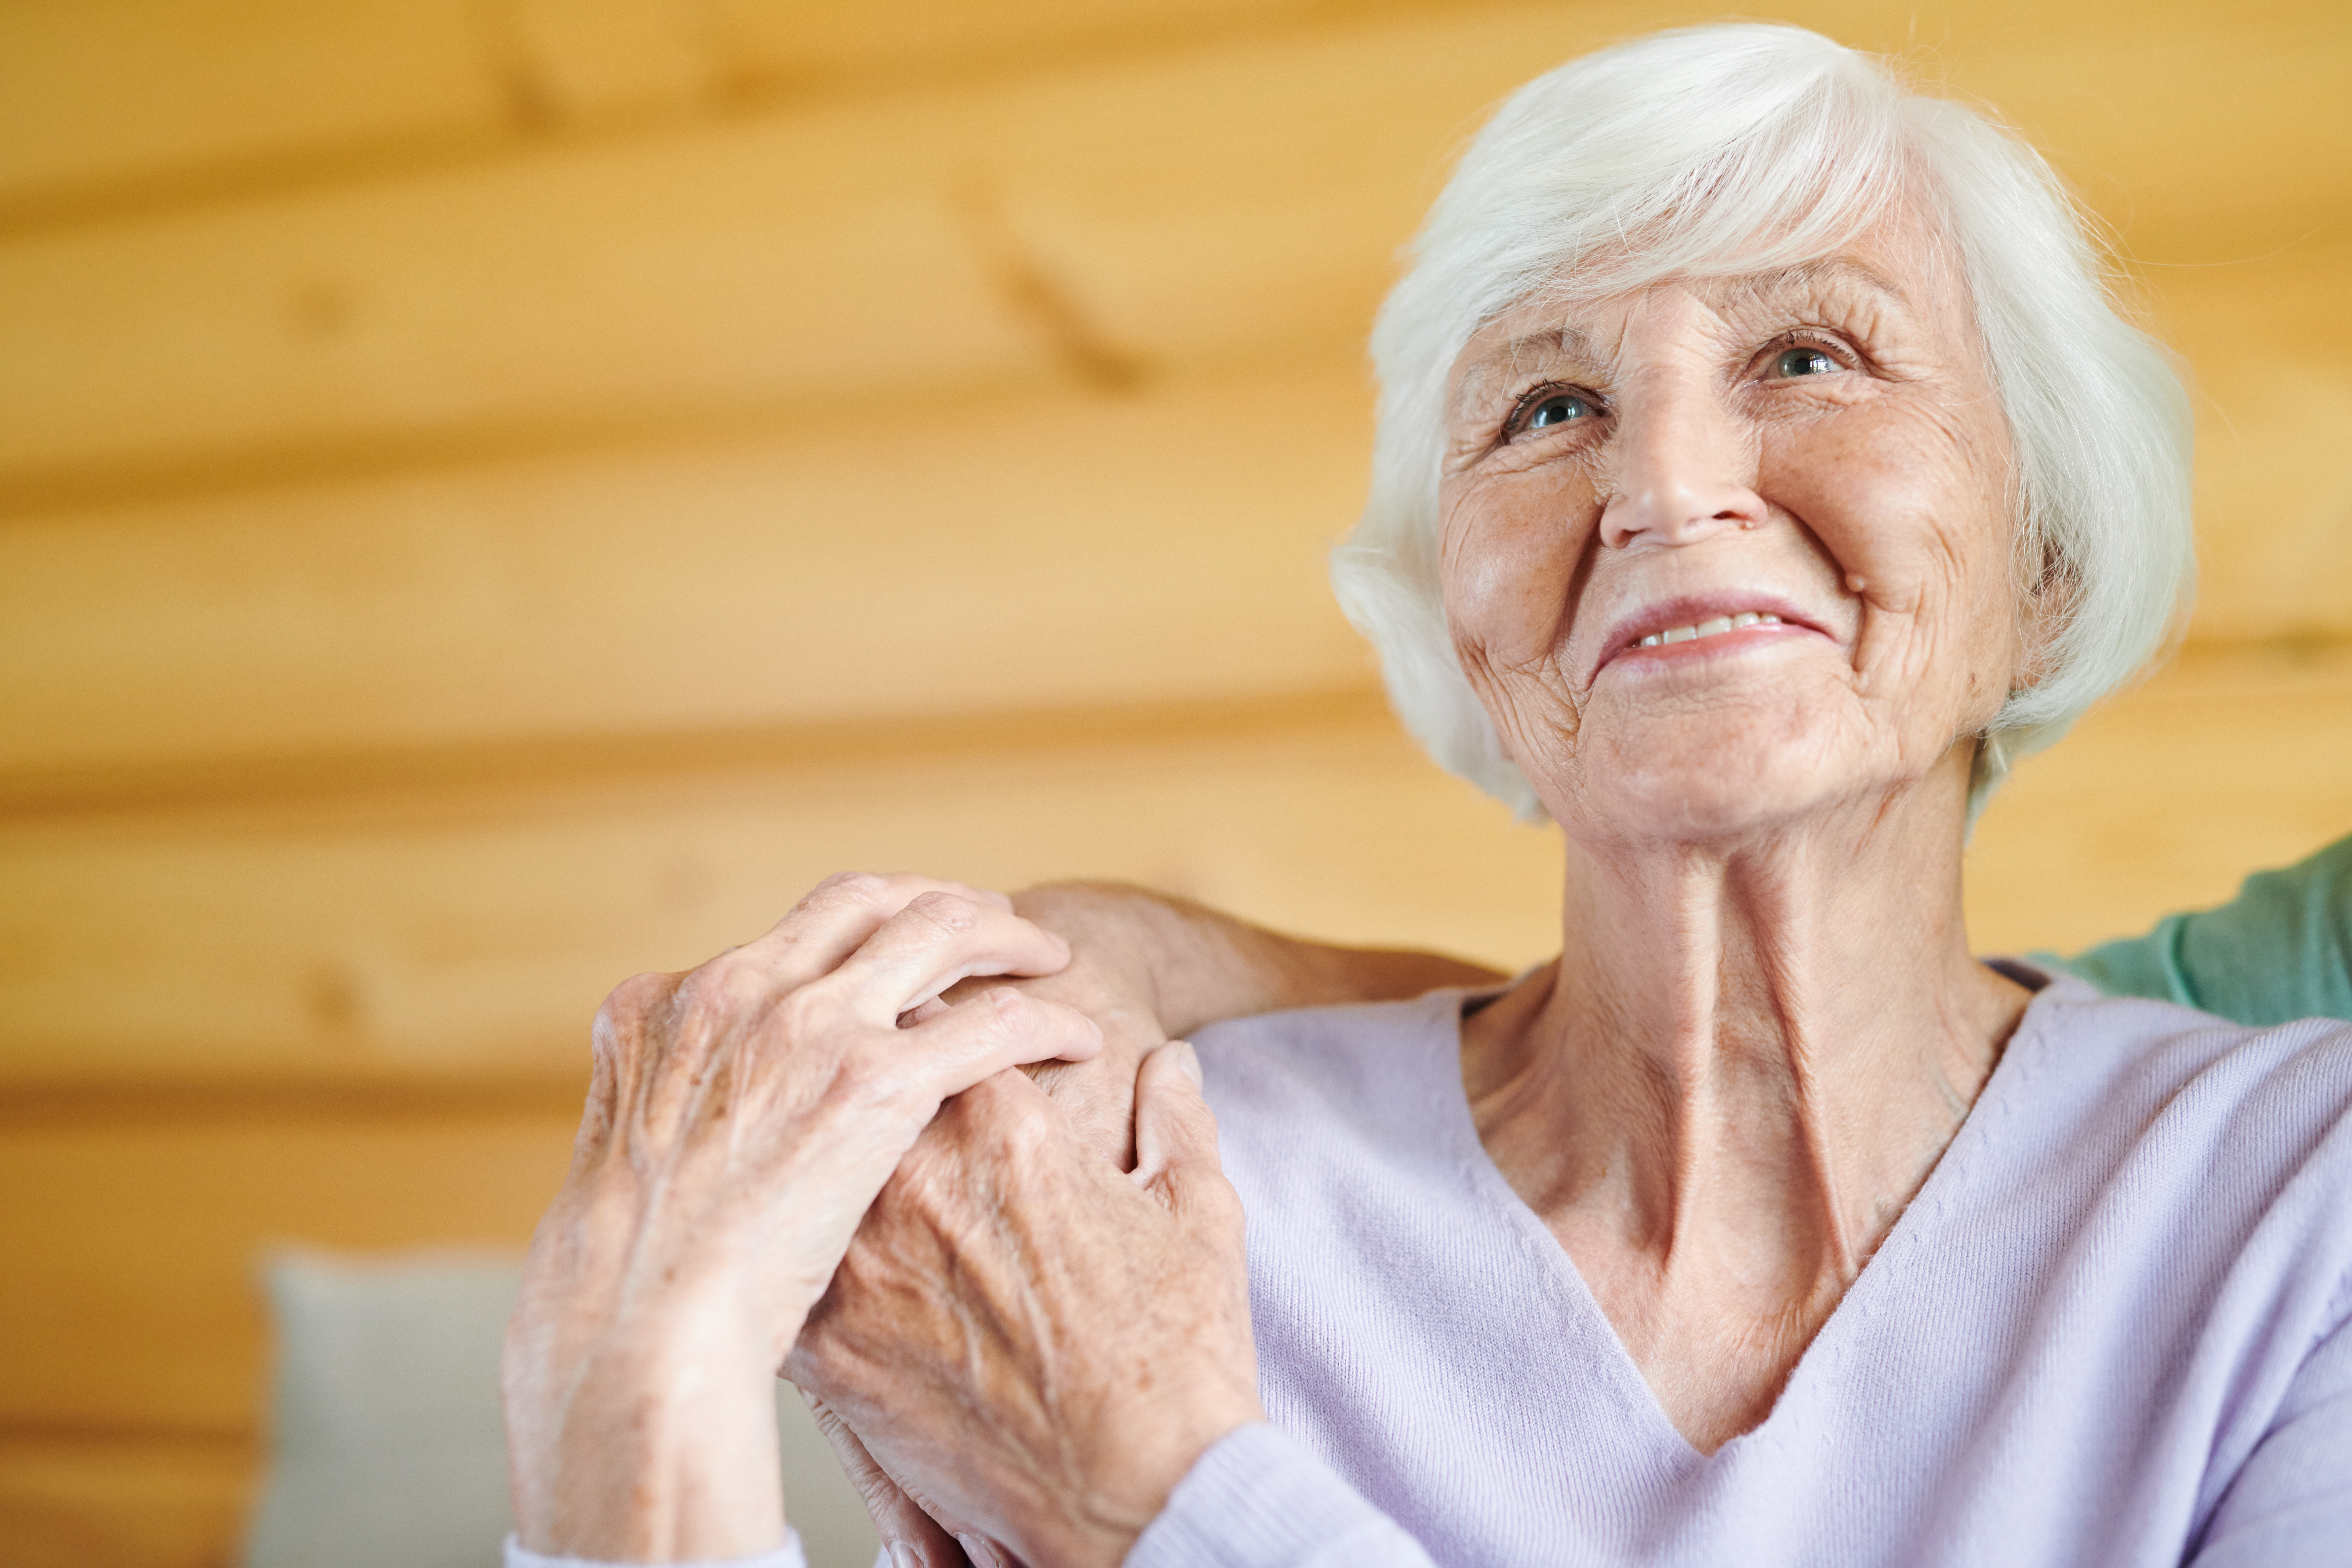 Virtual Visitations at Senior Centers, Assisted Living, and Hospice